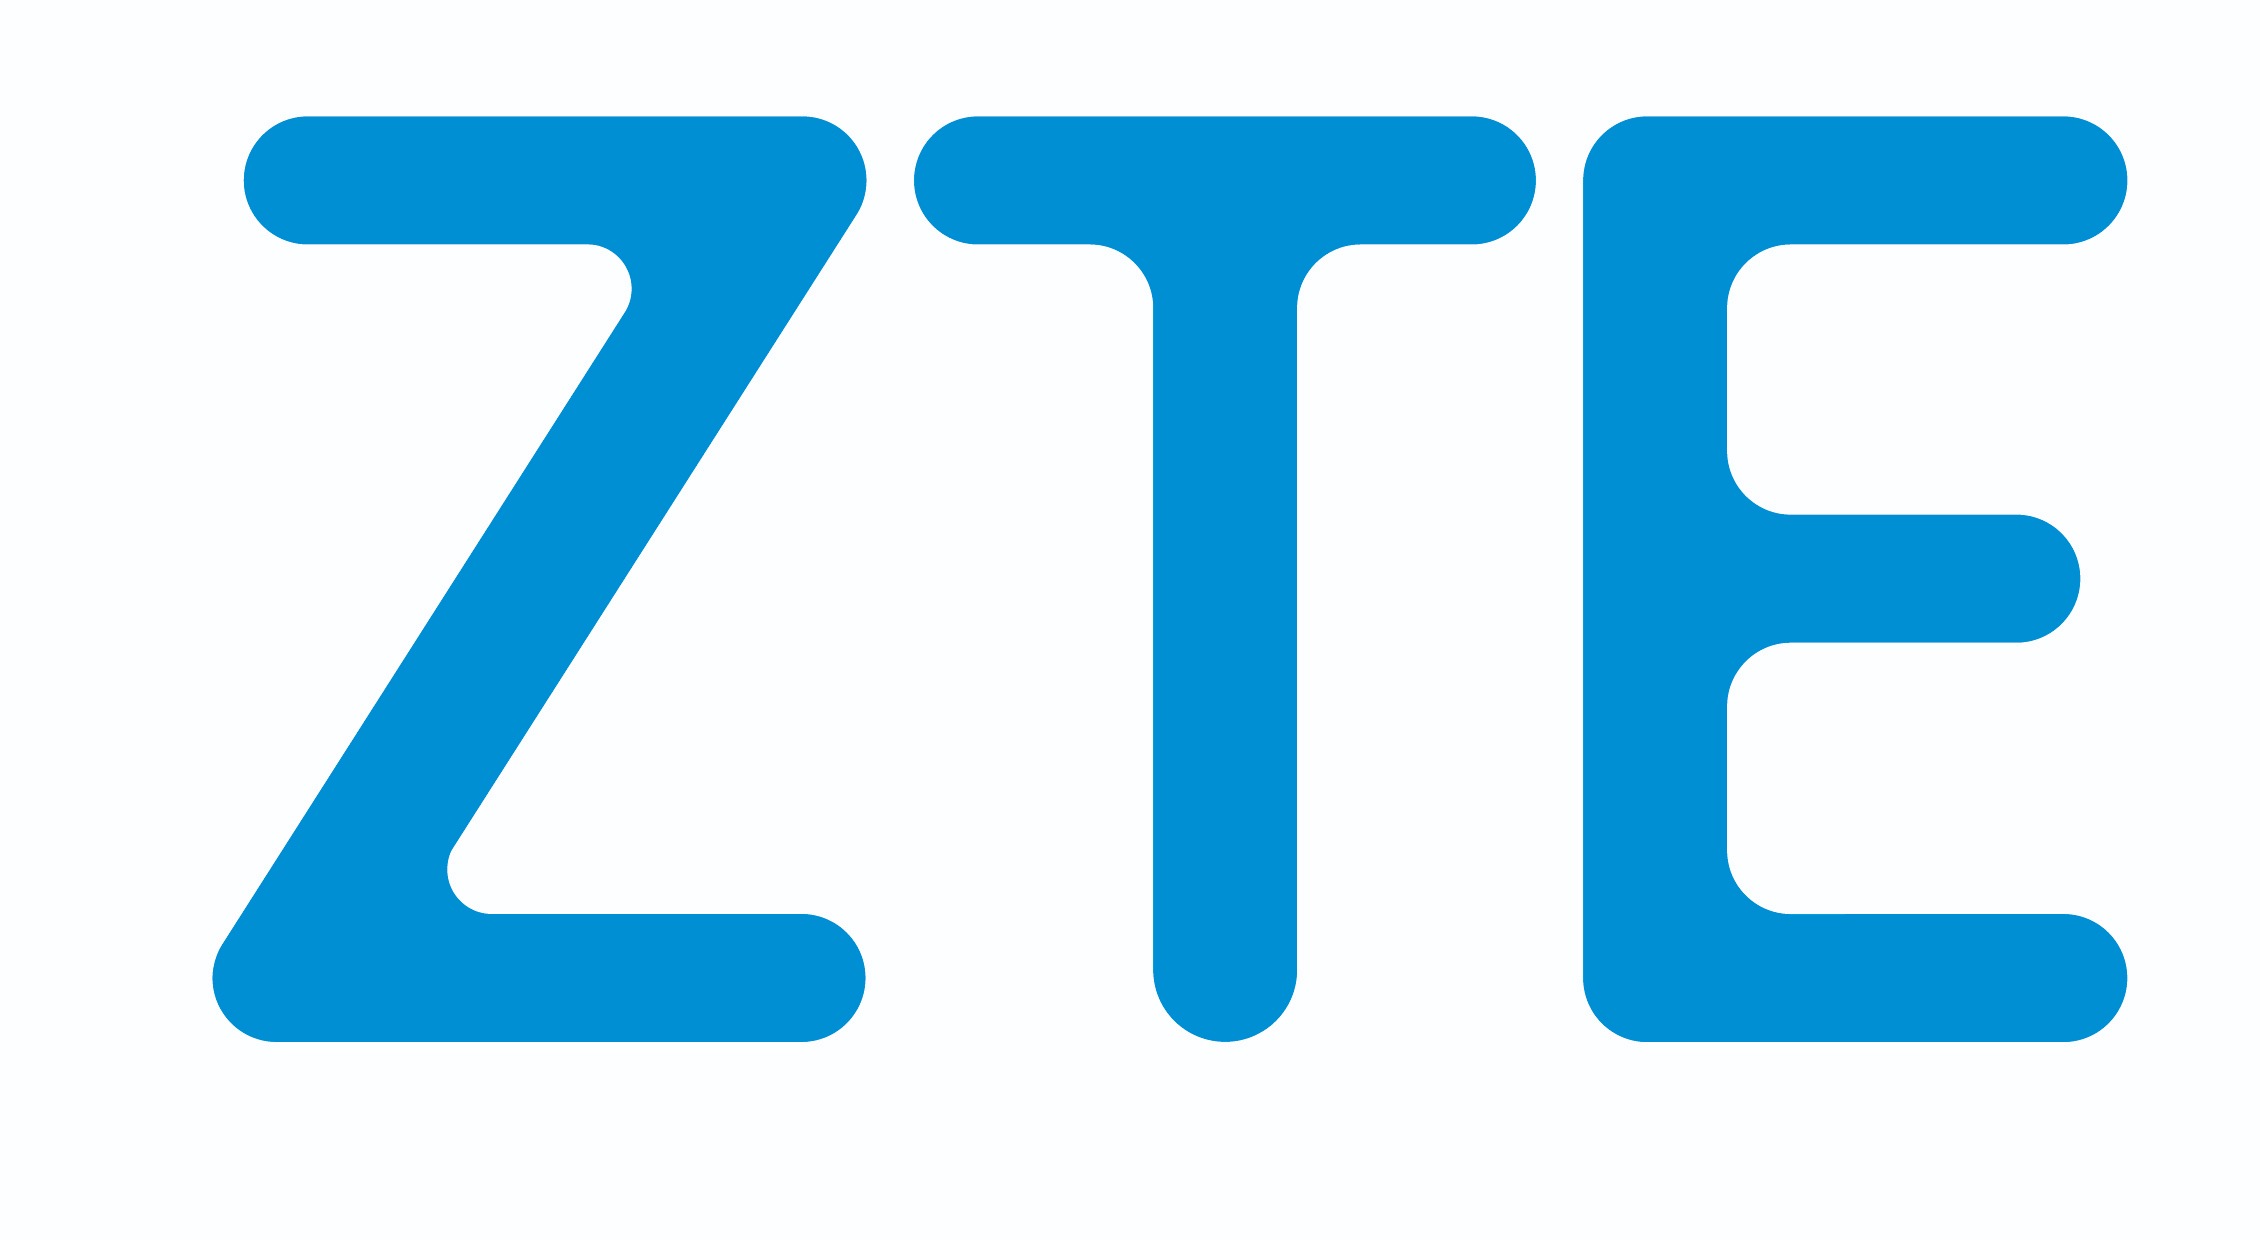 ZTE Malaysia Official